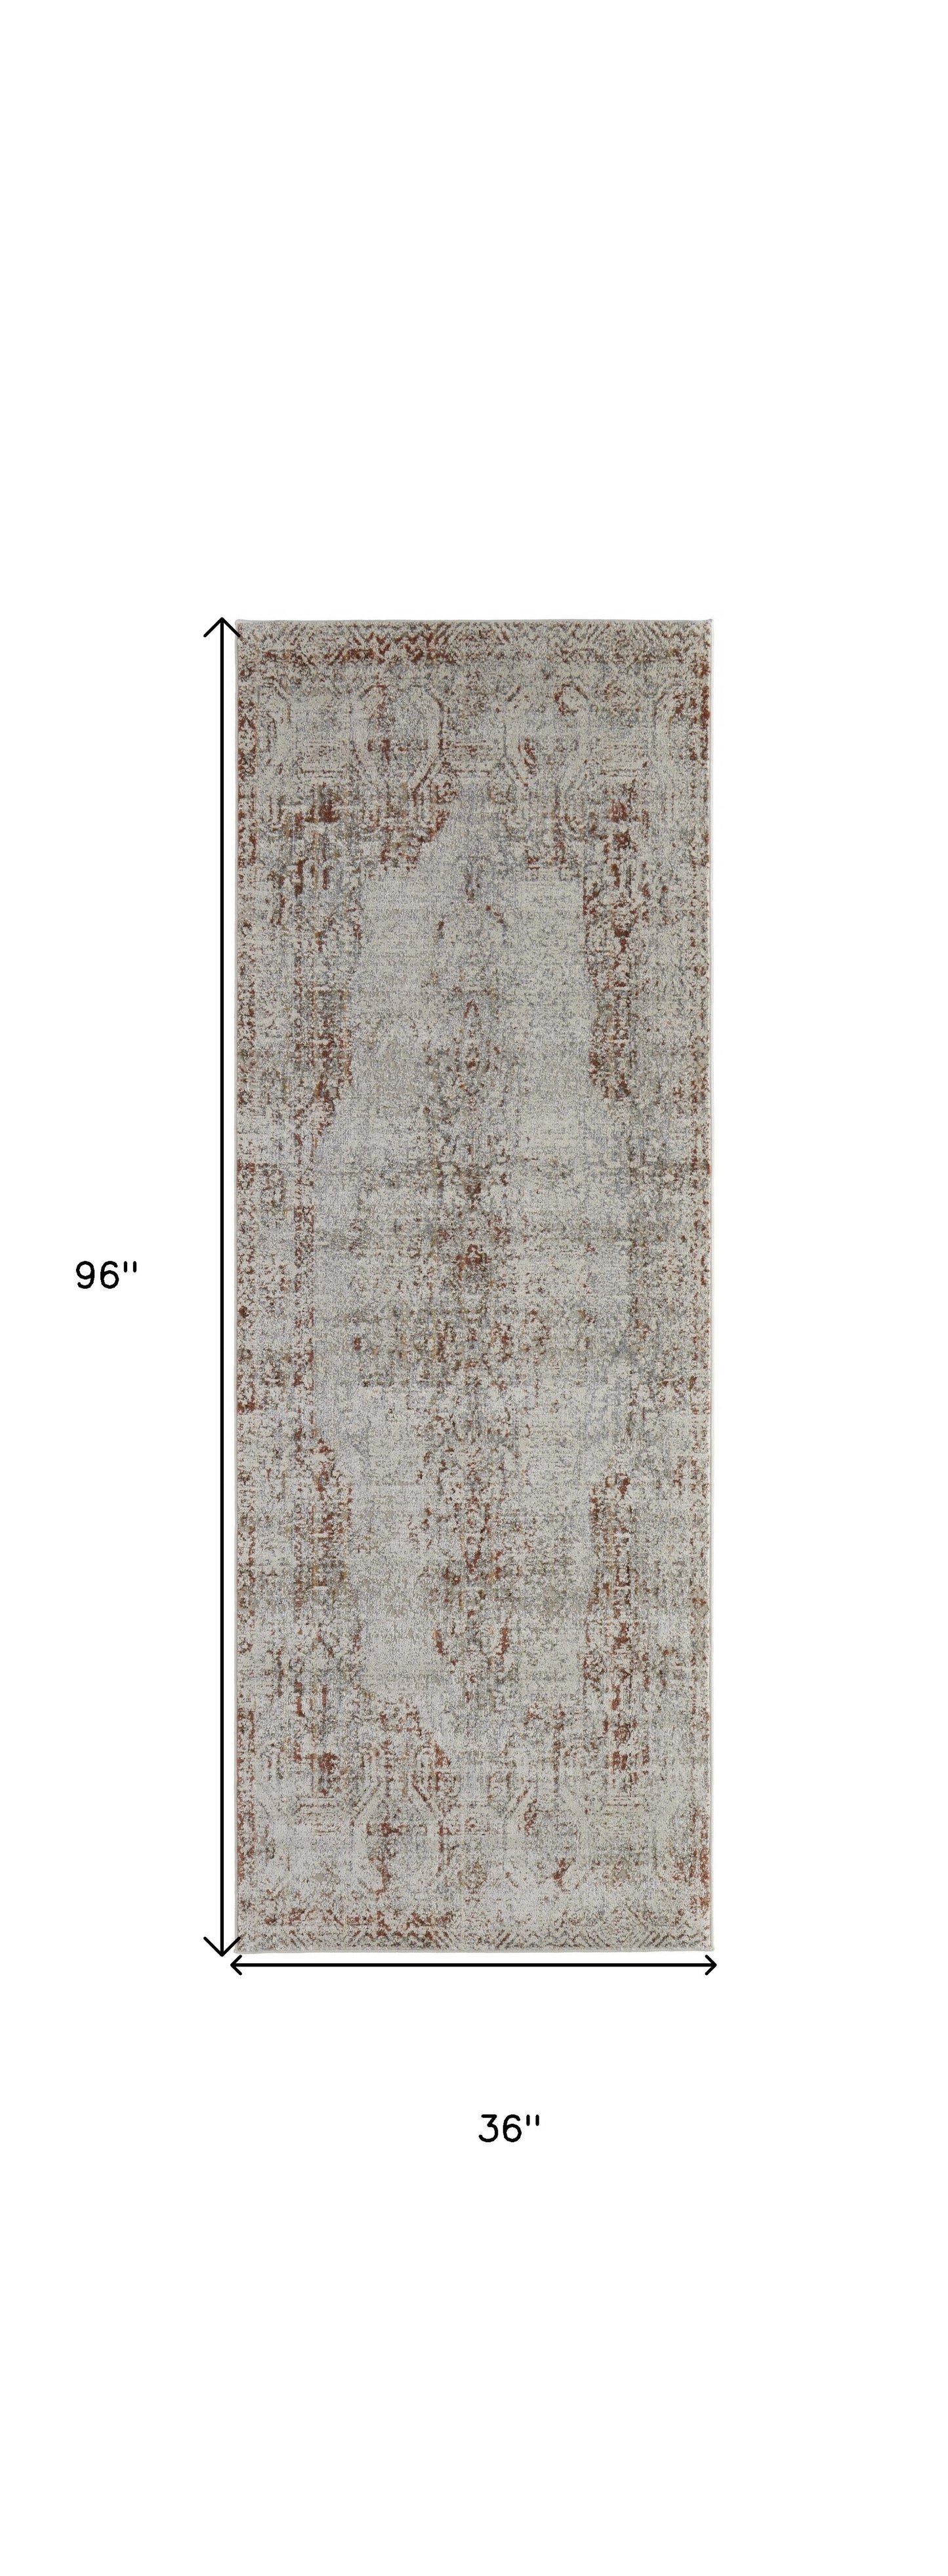 8' X 10' Tan Ivory And Orange Floral Power Loom Distressed Area Rug With Fringe